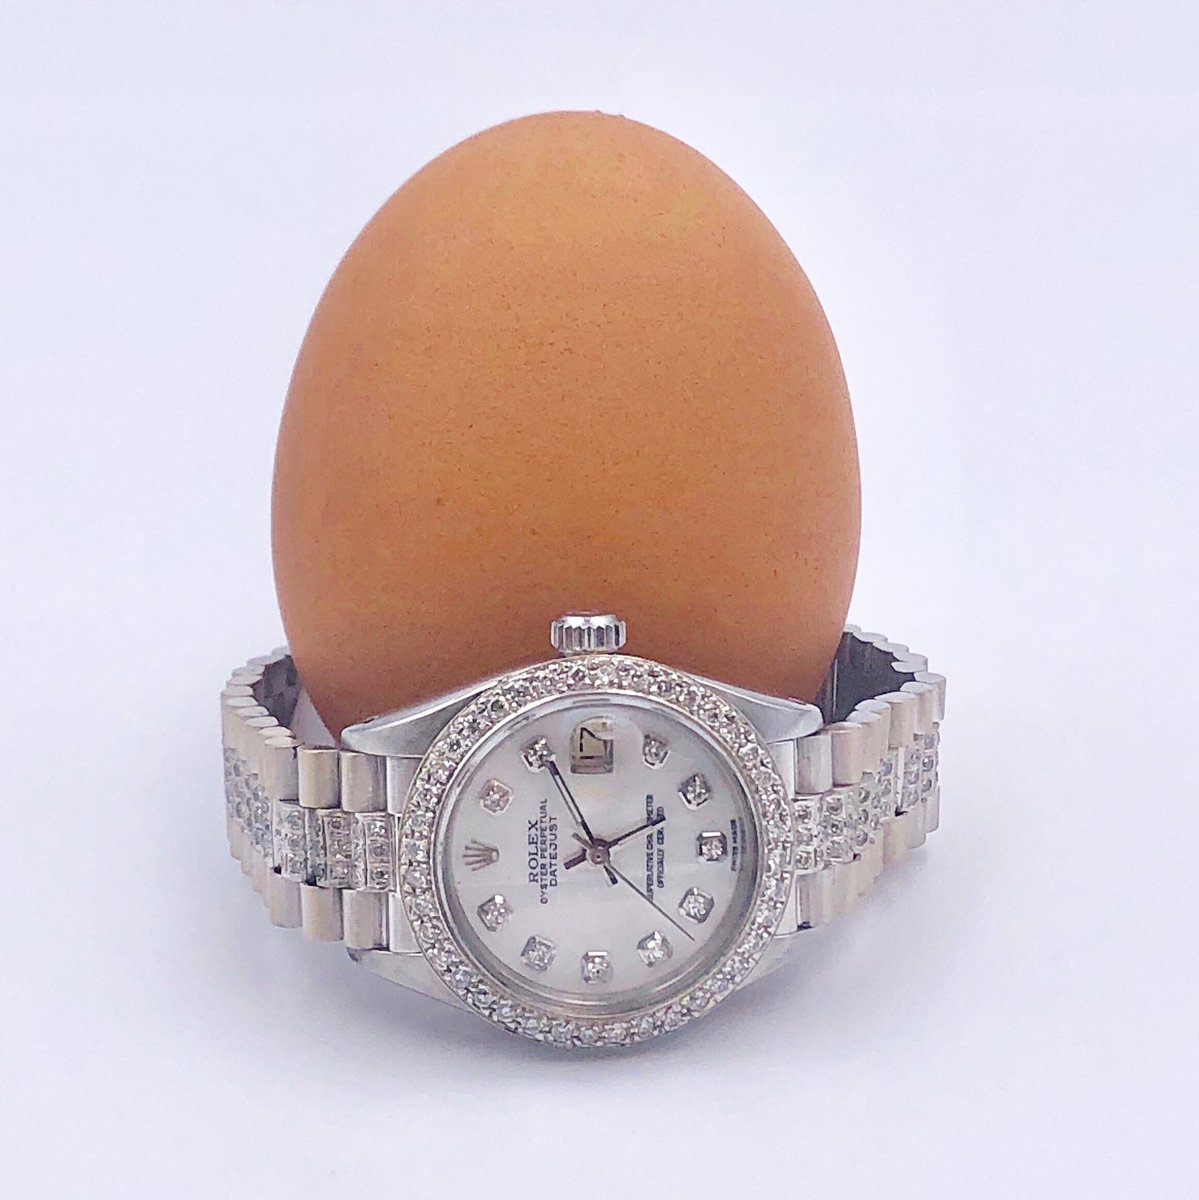 Are we too late or is this still egg-citing? 🥚 #shopwatchlink 
#rolex #rolexdatejust #diamonds #jubileedial #instagramegg #worldrecordegg